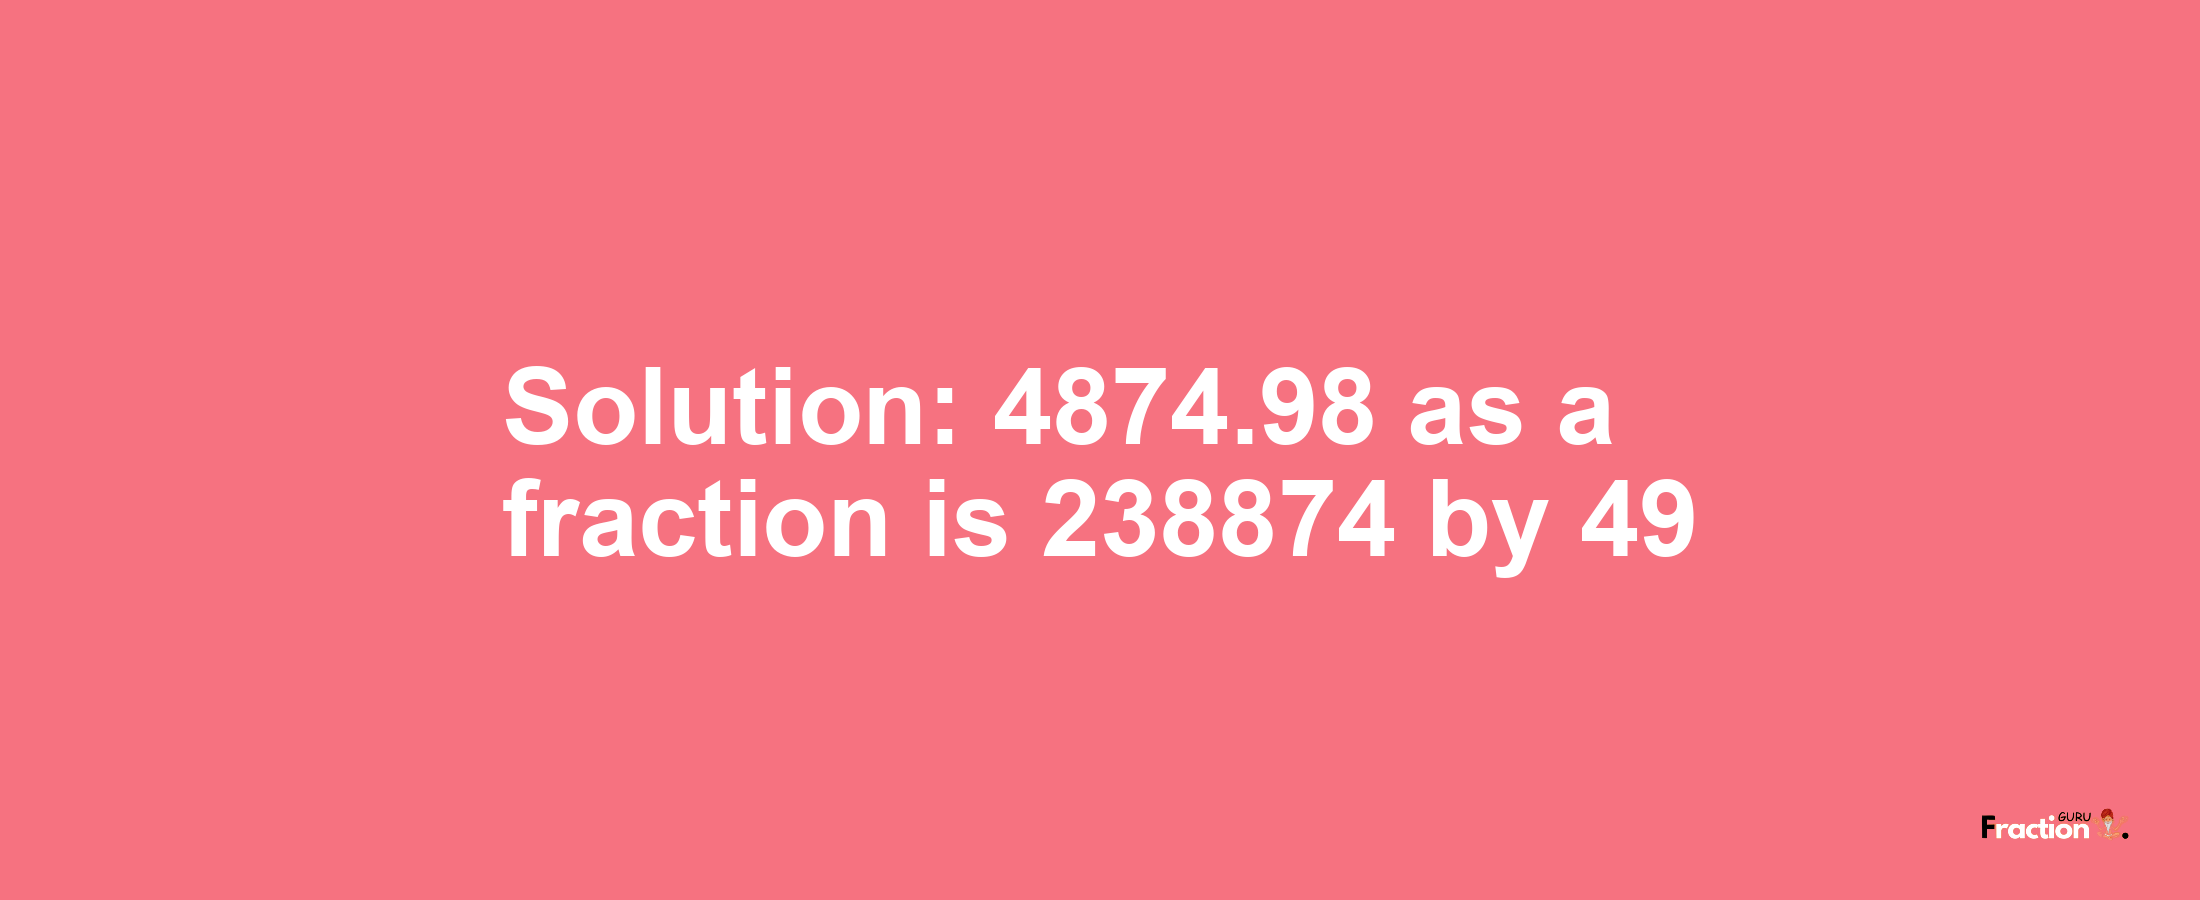 Solution:4874.98 as a fraction is 238874/49